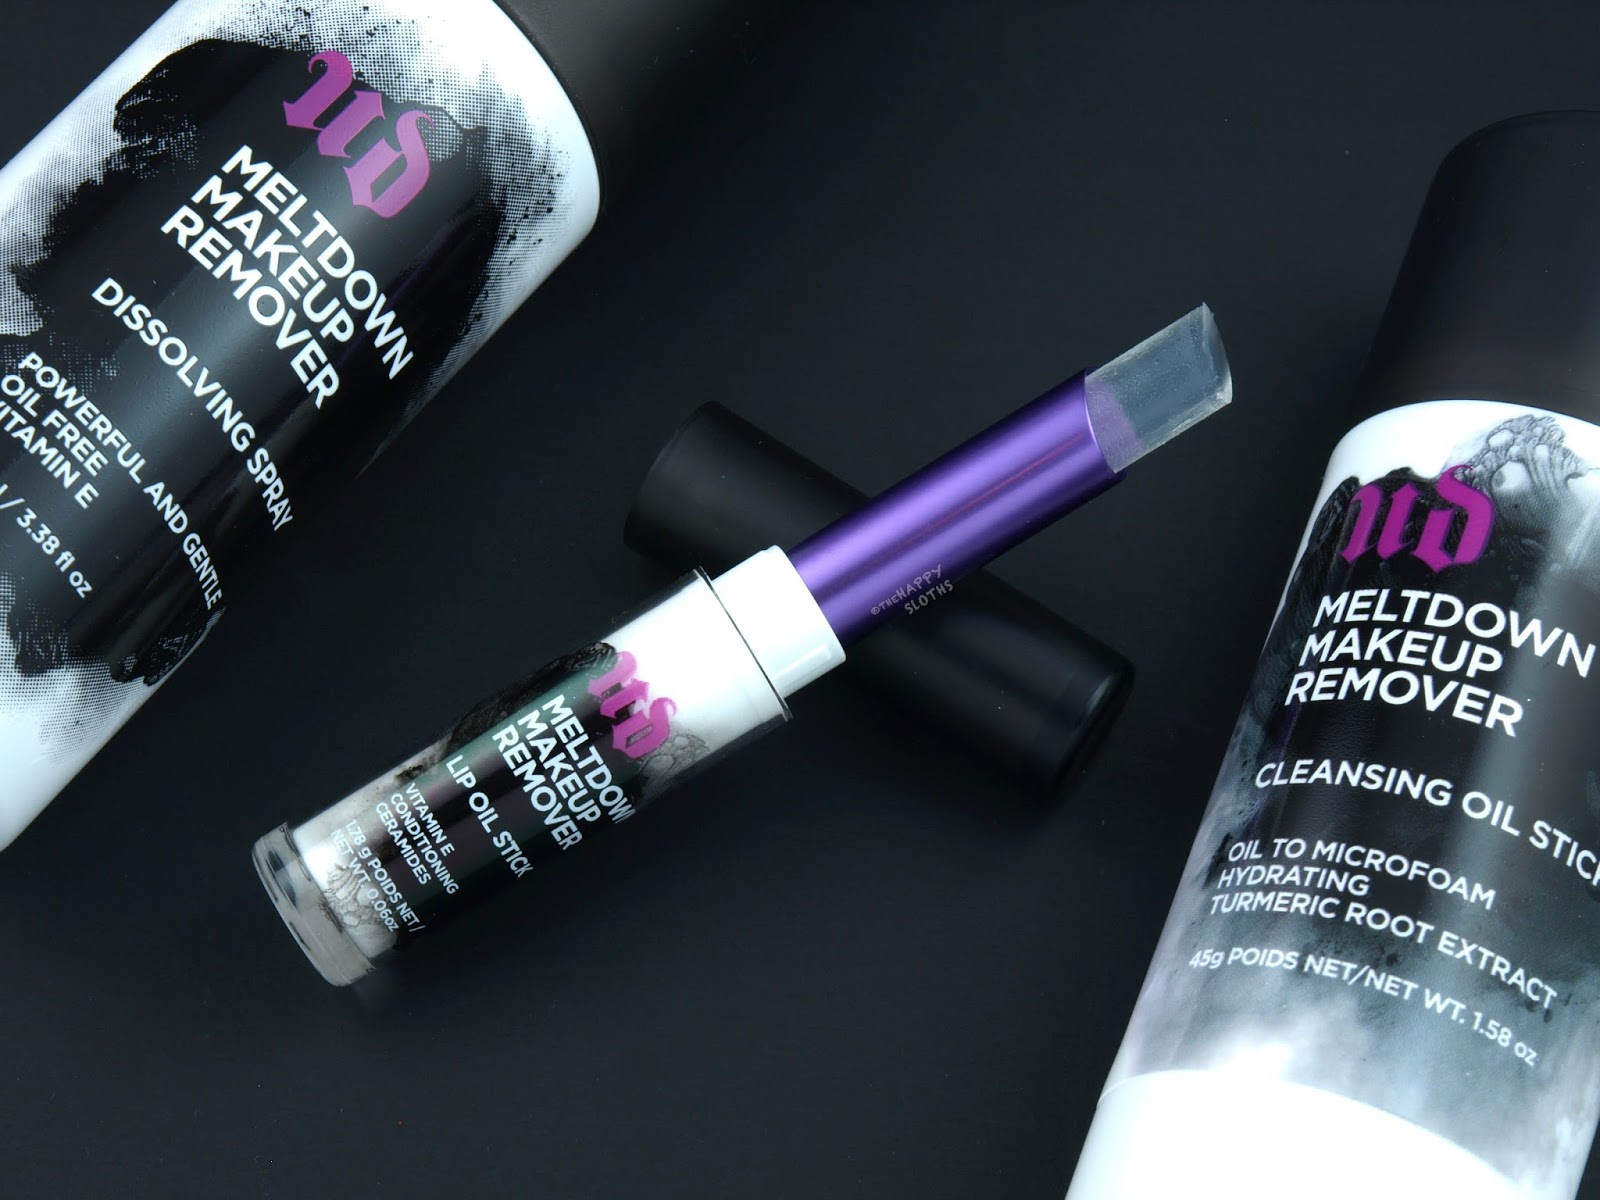 Urban Decay Meltdown Makeup Remover Lip Oil Stick: Review